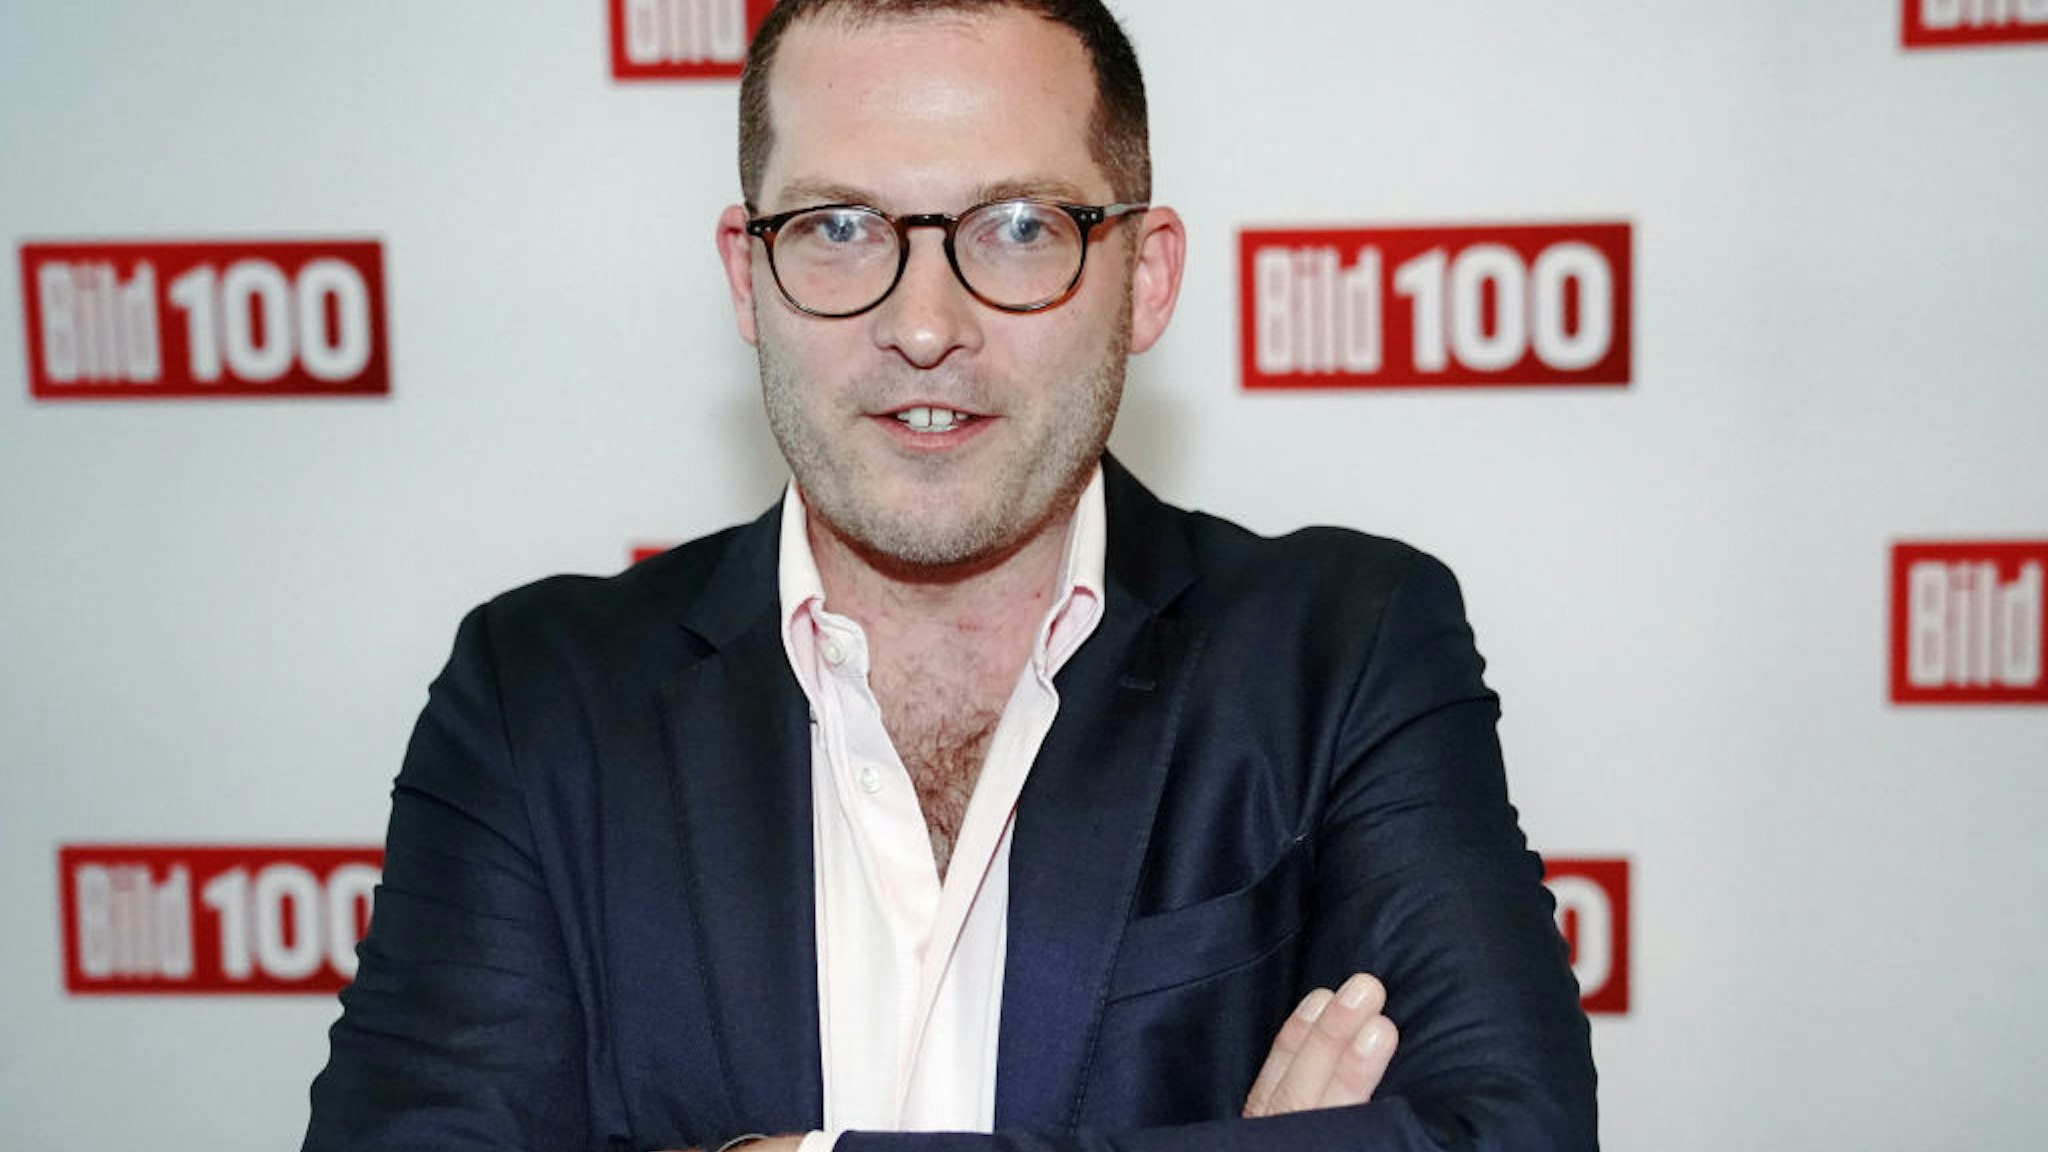 "Bild" editor-in-chief Julian Reichelt at the beginning of the Bild100 party with personalities from politics, society and sport.